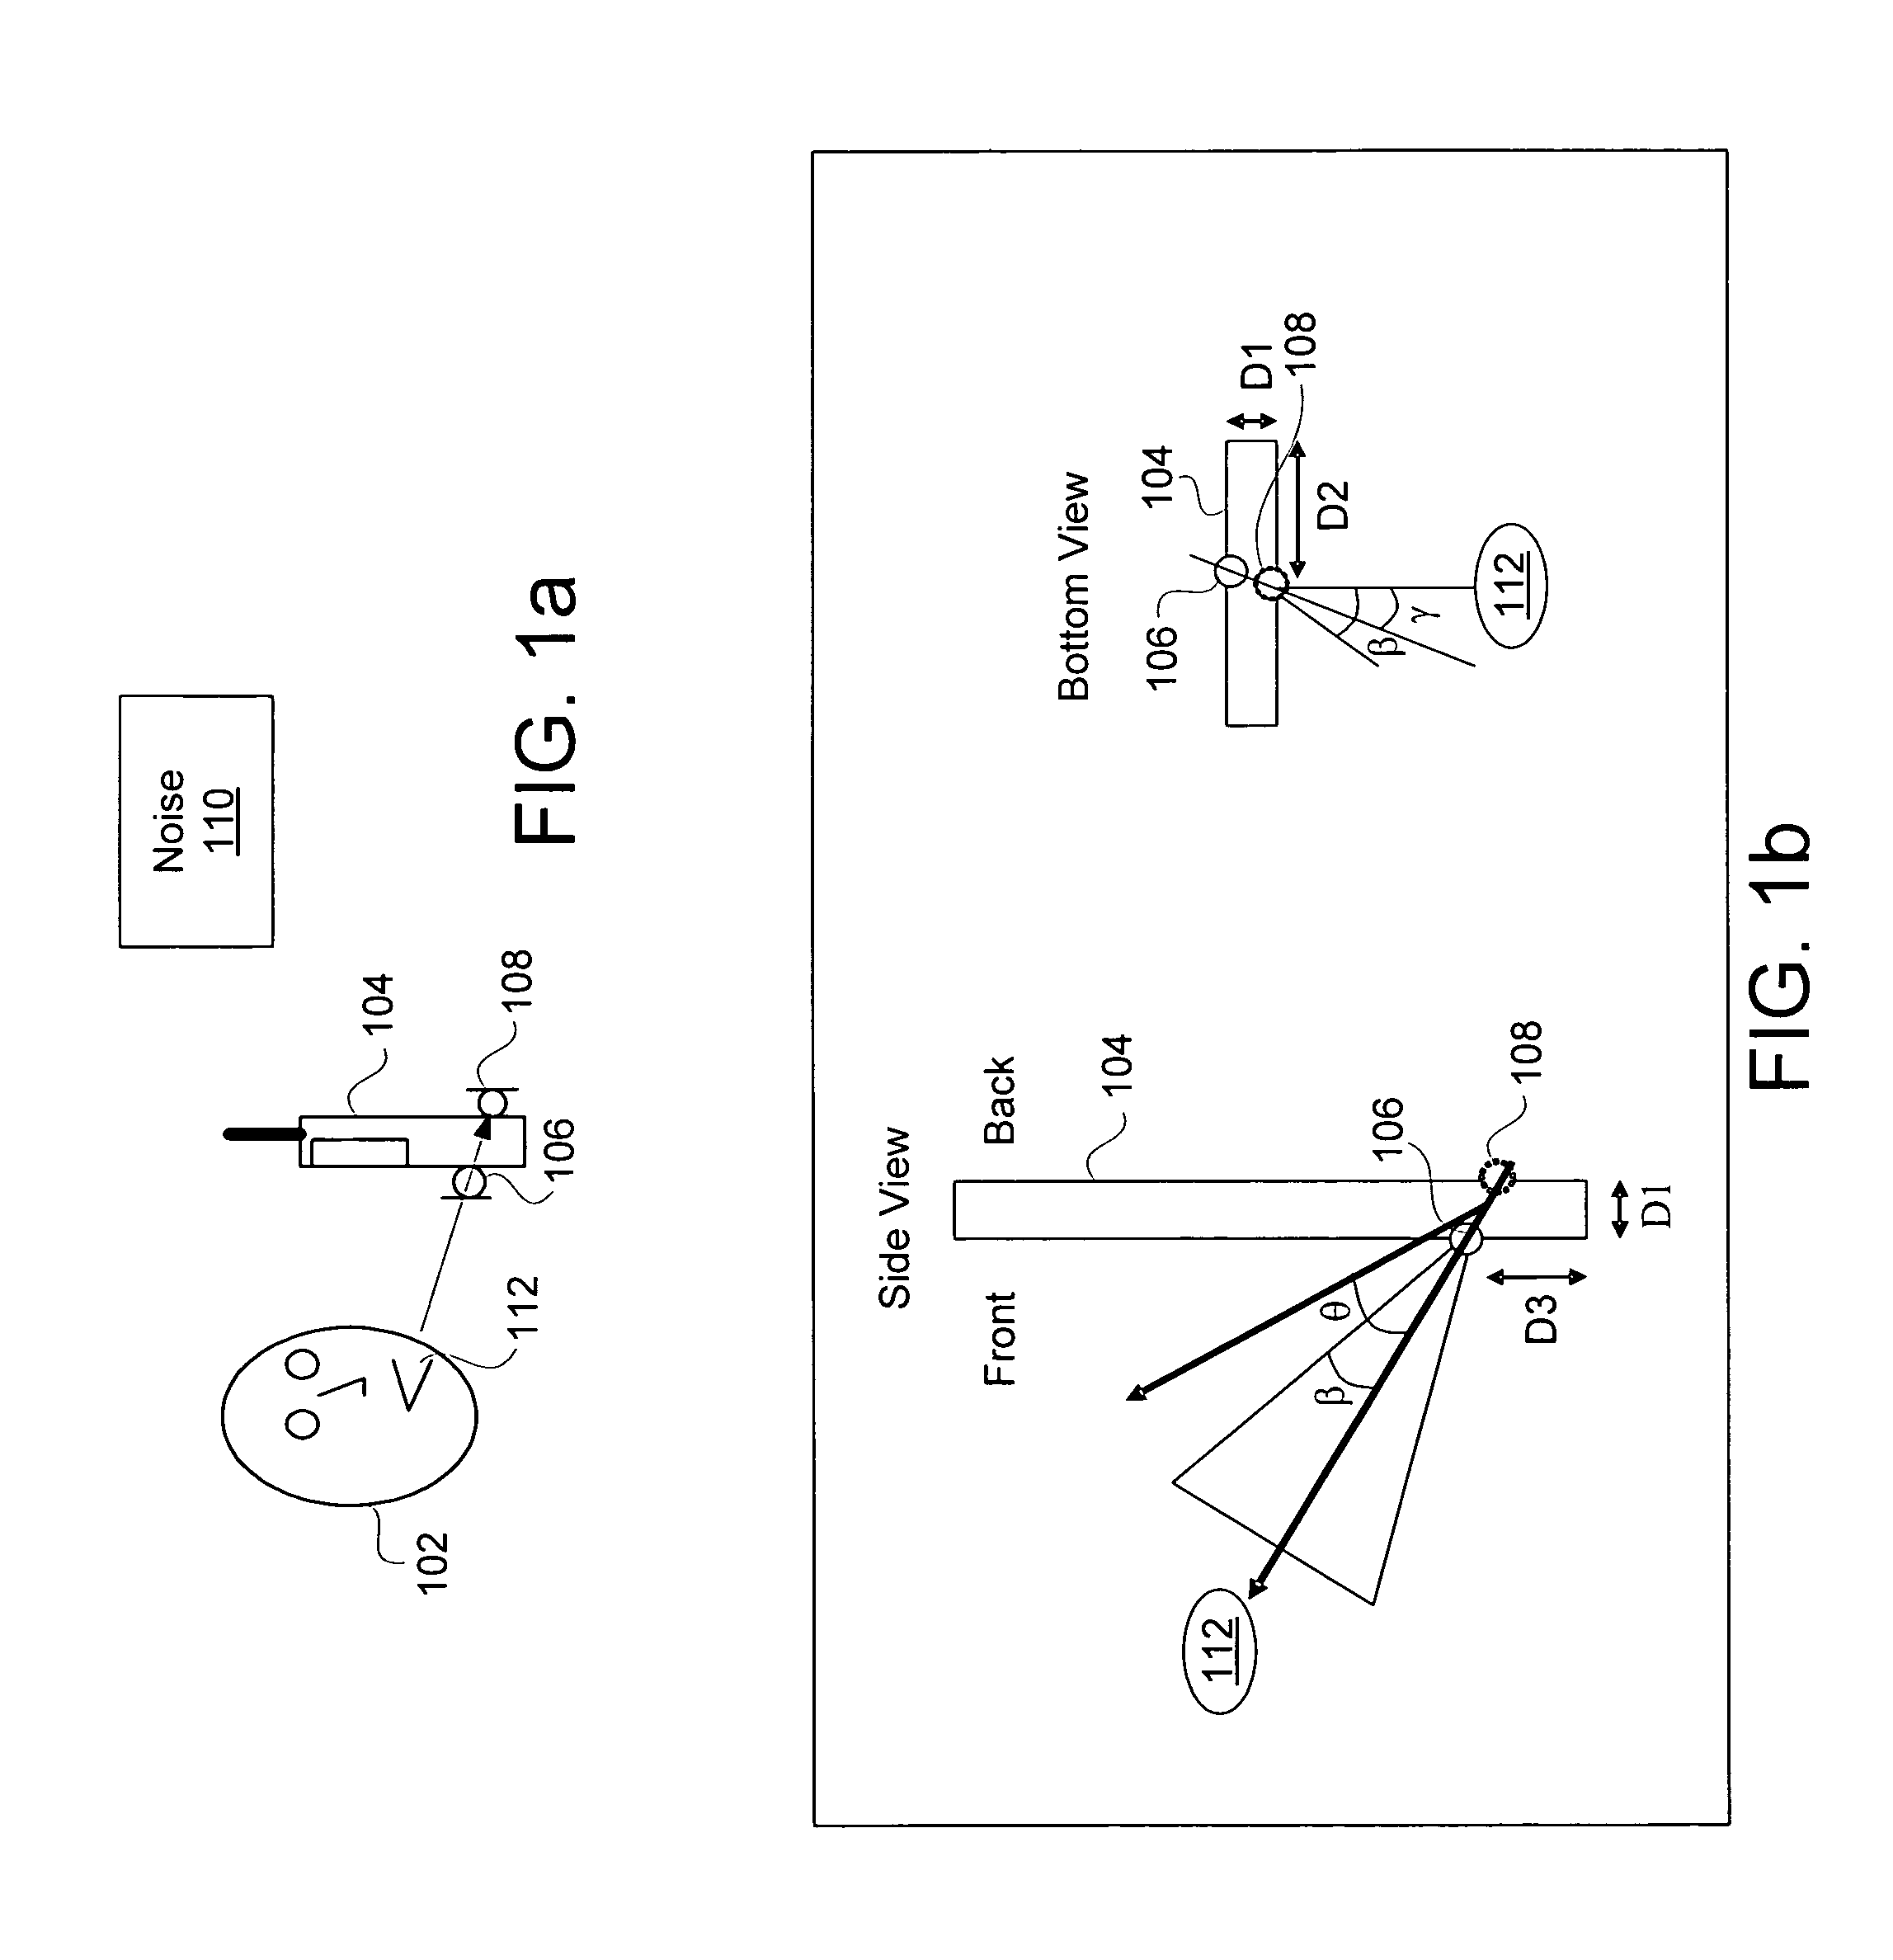 System and method for providing close microphone adaptive array processing